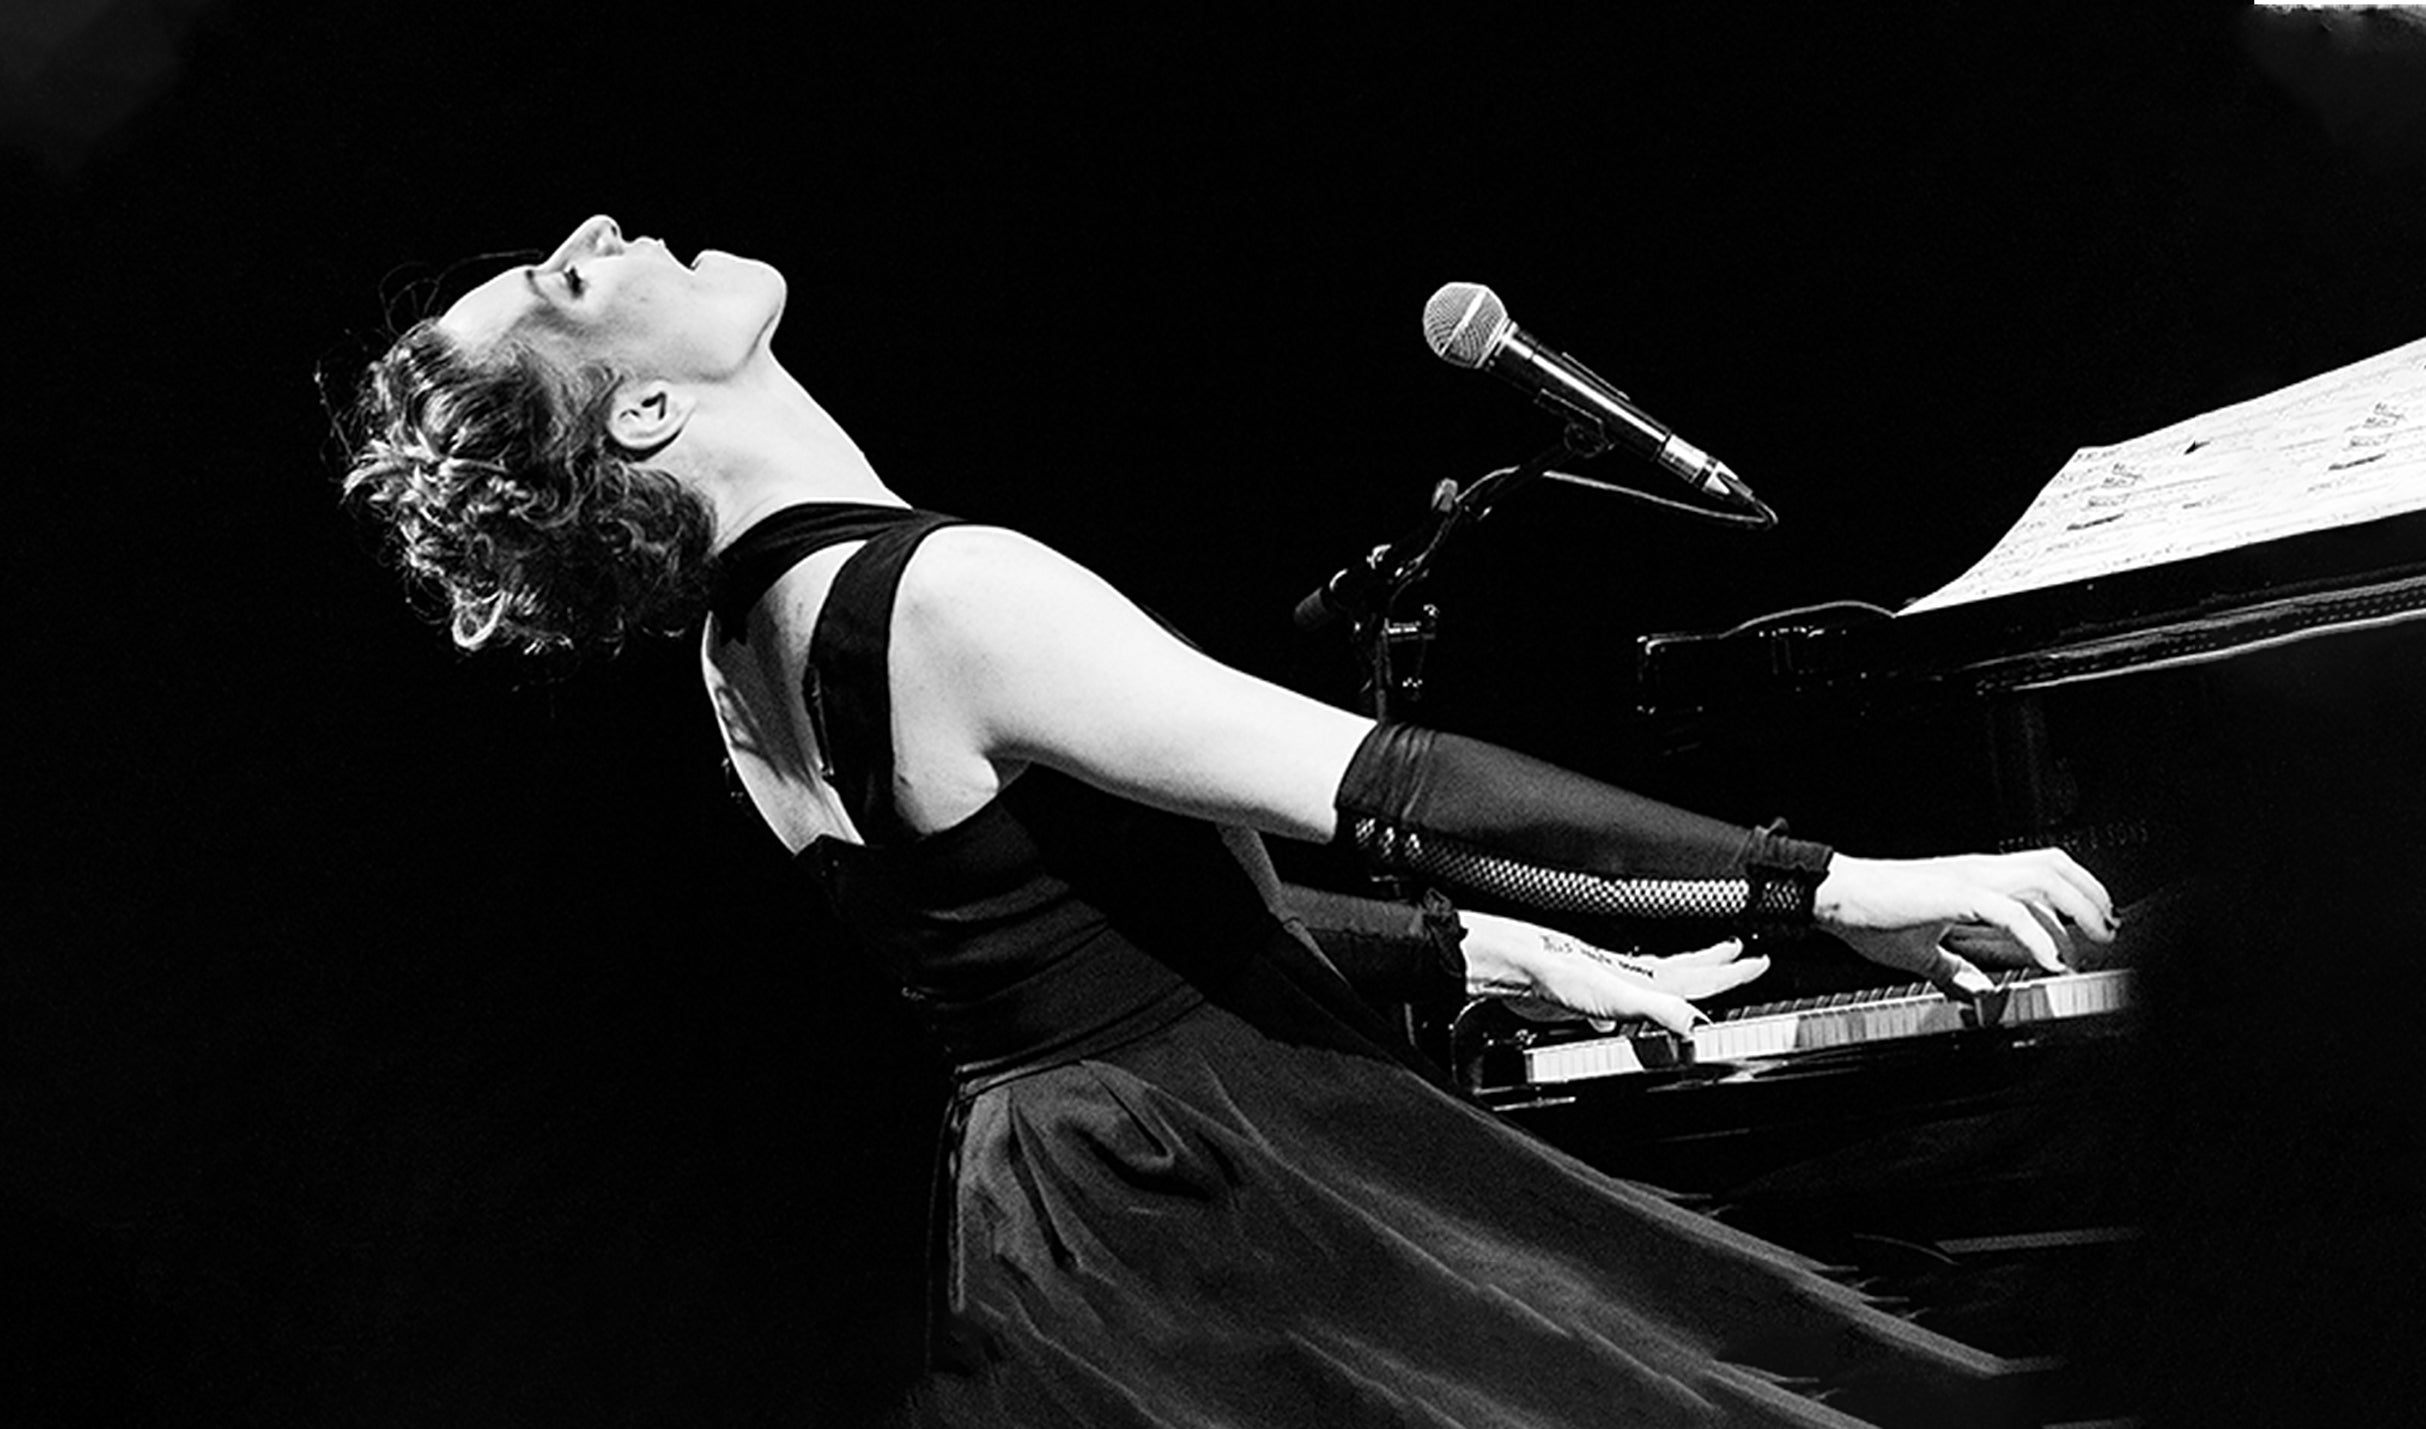 An Evening with Amanda Palmer free presale code for show tickets in Boston, MA (The Wilbur)